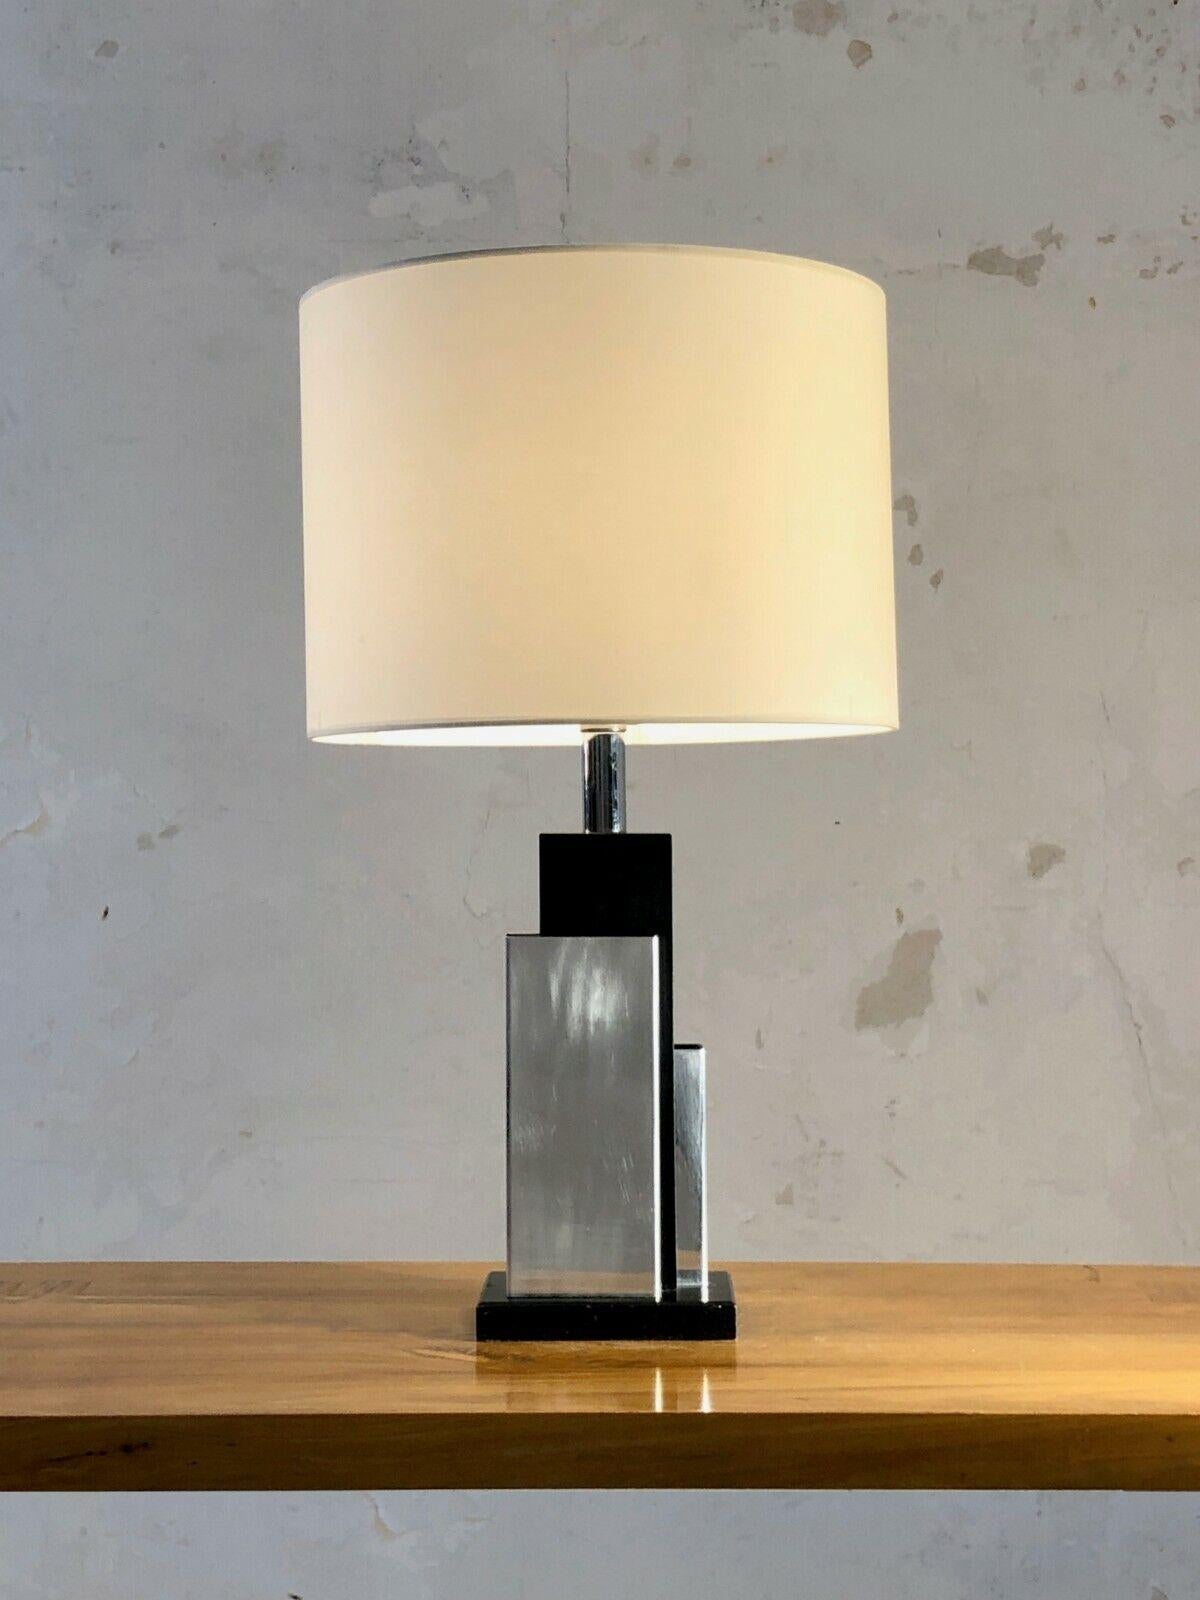 A radical architectural table lamp, PostModern, Modernist, Constructivist, Cubist, Memphis, in black lacquered wood with asymmetrical chrome metal decoration, in the spirit of Willy Rizzo, to be attributed, France 1970.

SOLD WITH OR WITHOUT